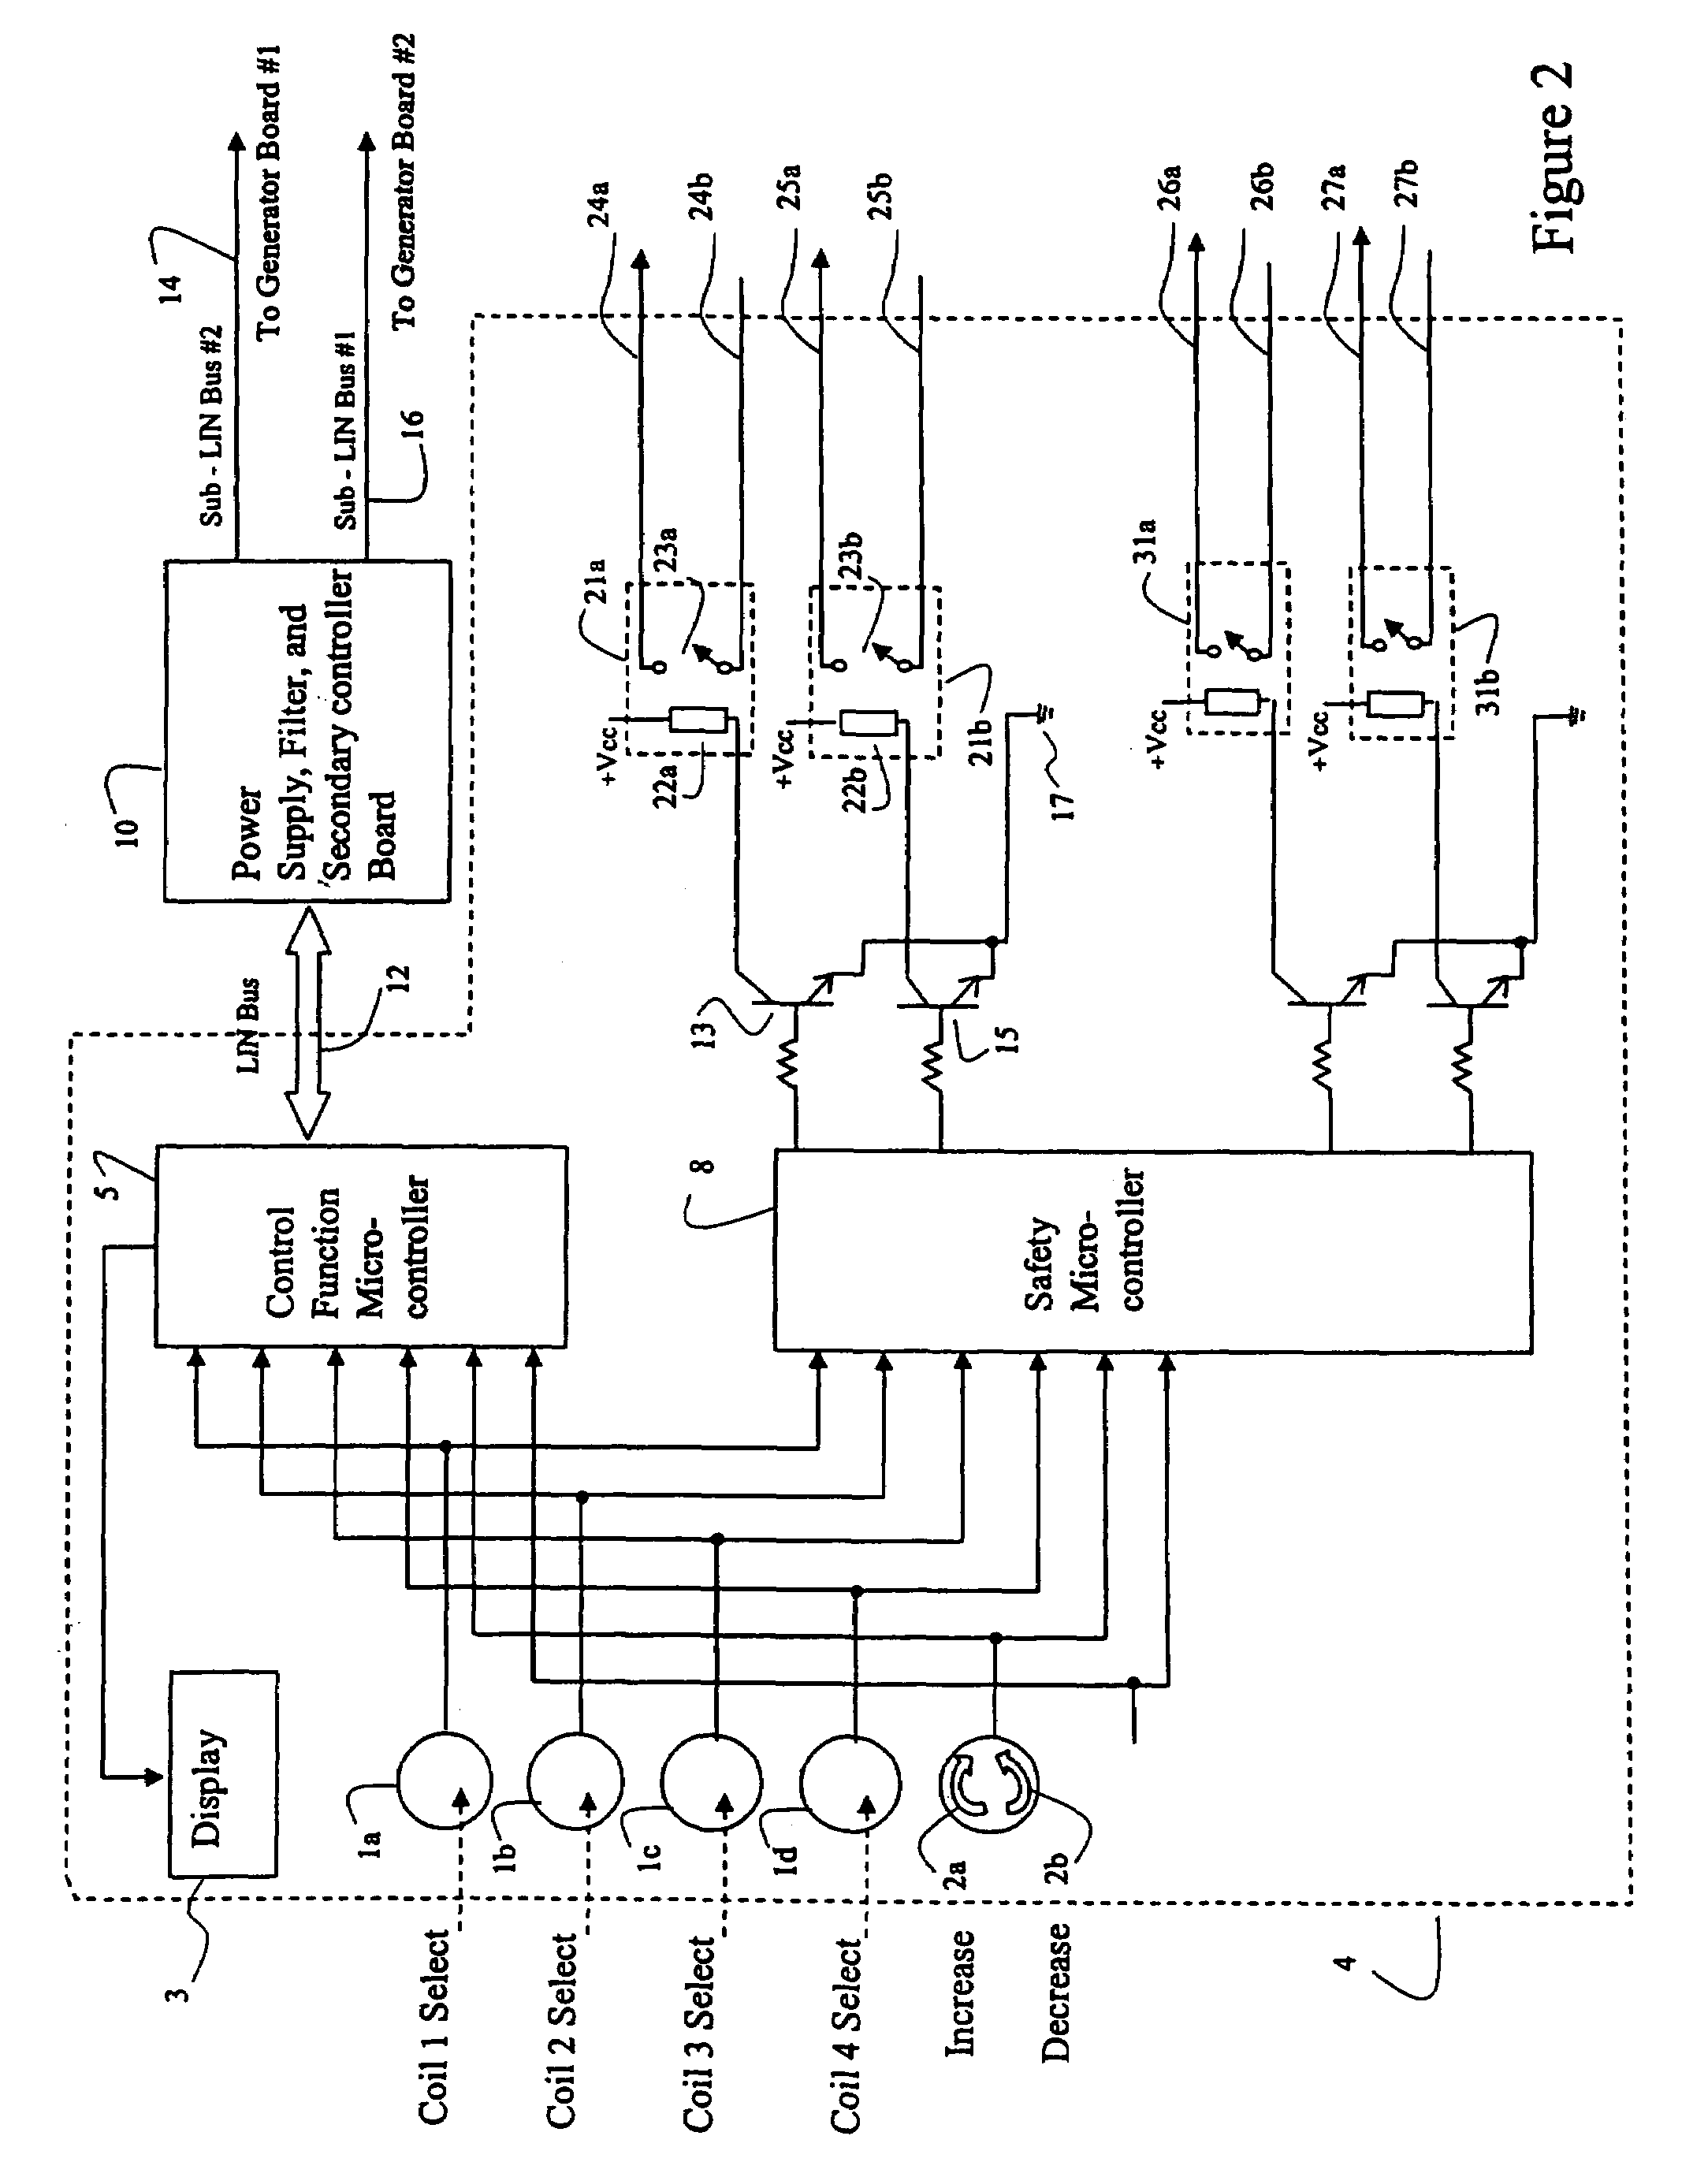 Systems and methods of using multiple microcontrollers for fail-safe control and enhanced feature operation of an appliance